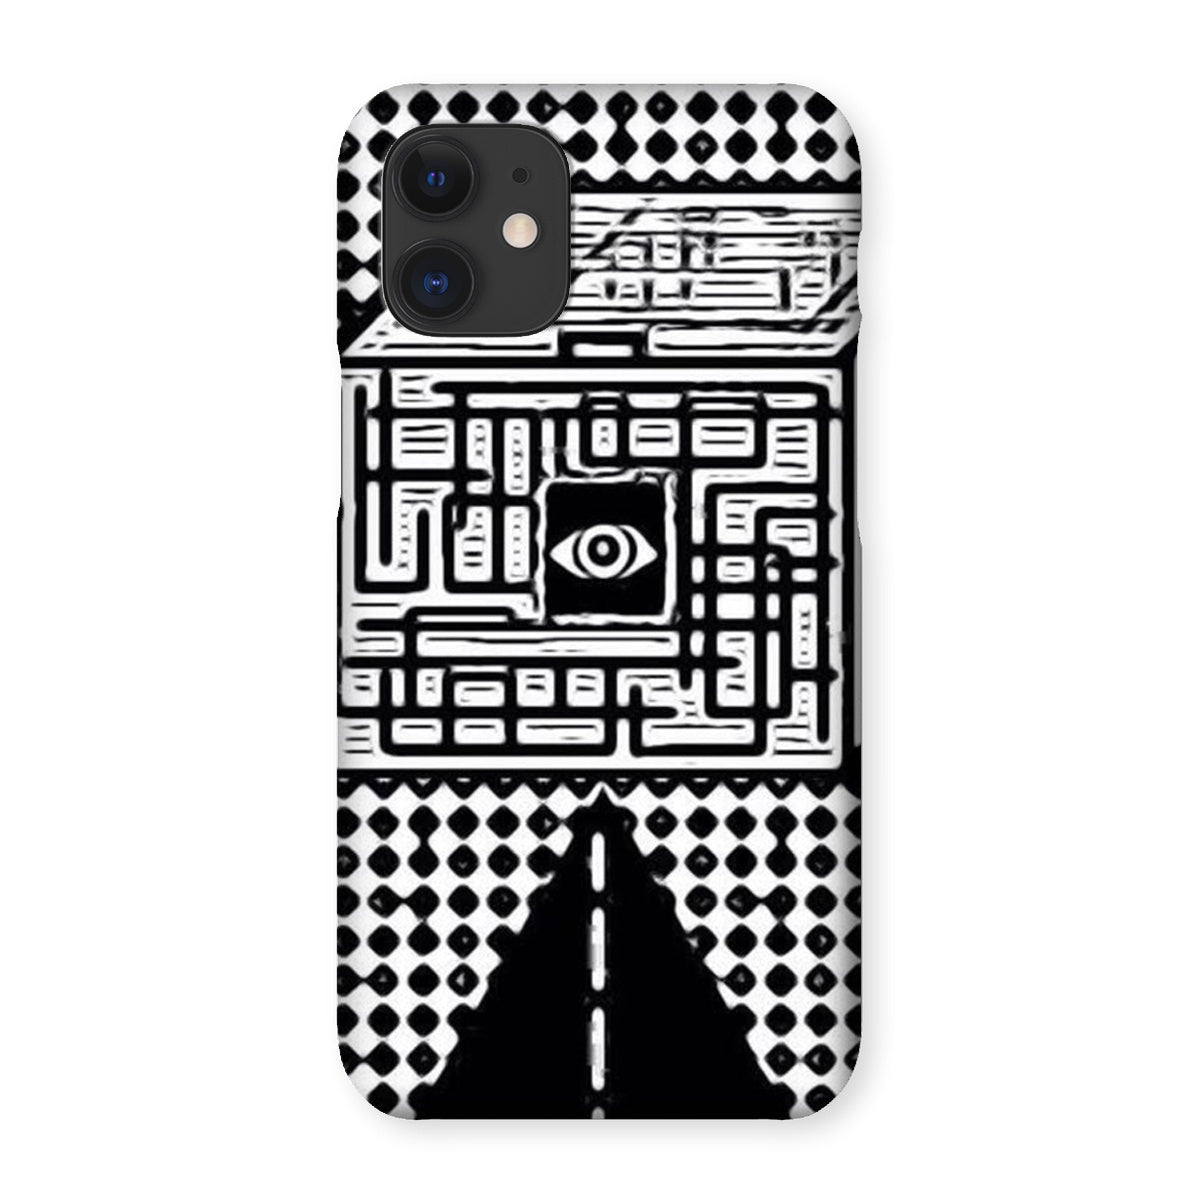 The Cube Snap Phone Case